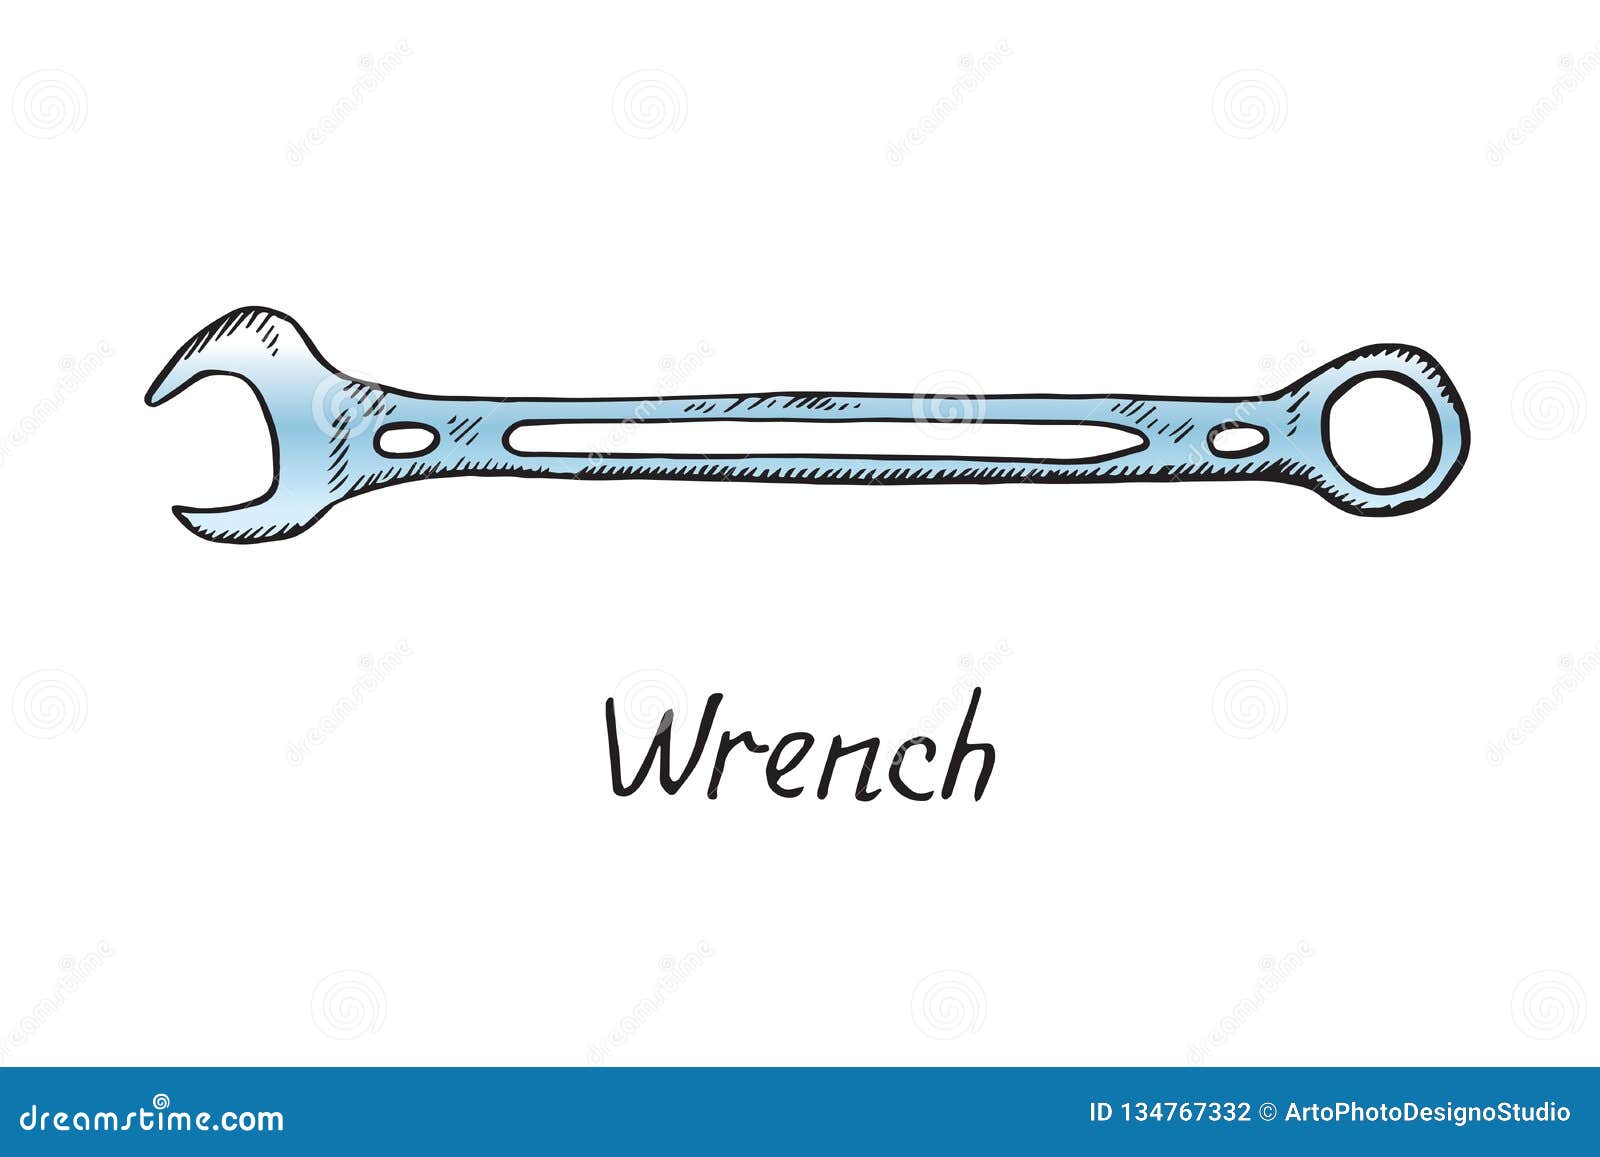 Share 151+ double ended spanner sketch